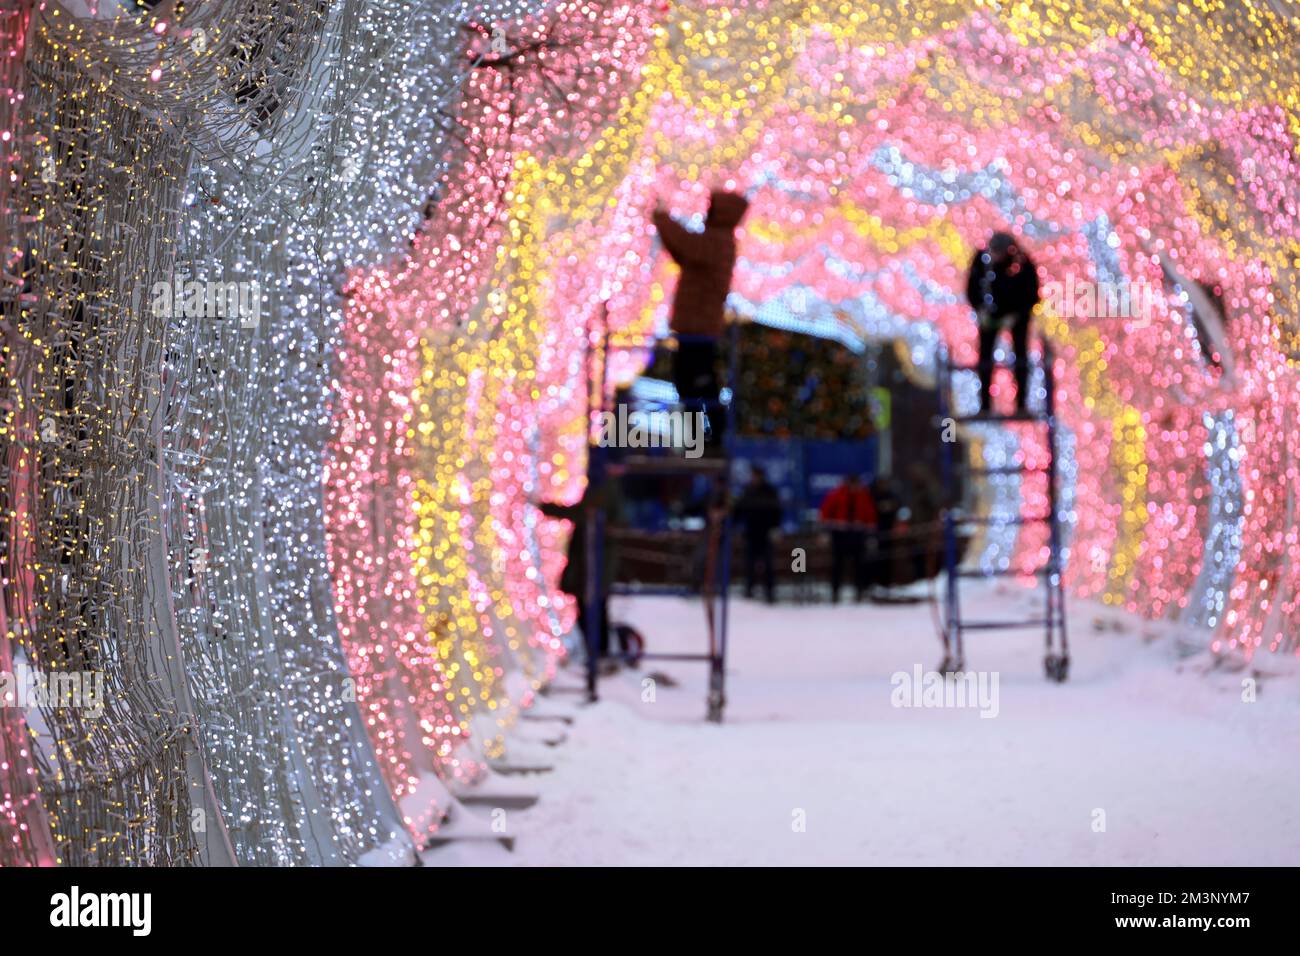 New Year ornaments on city street, workers decorating illuminated arch in winter city. Preparing for Christmas holidays Stock Photo